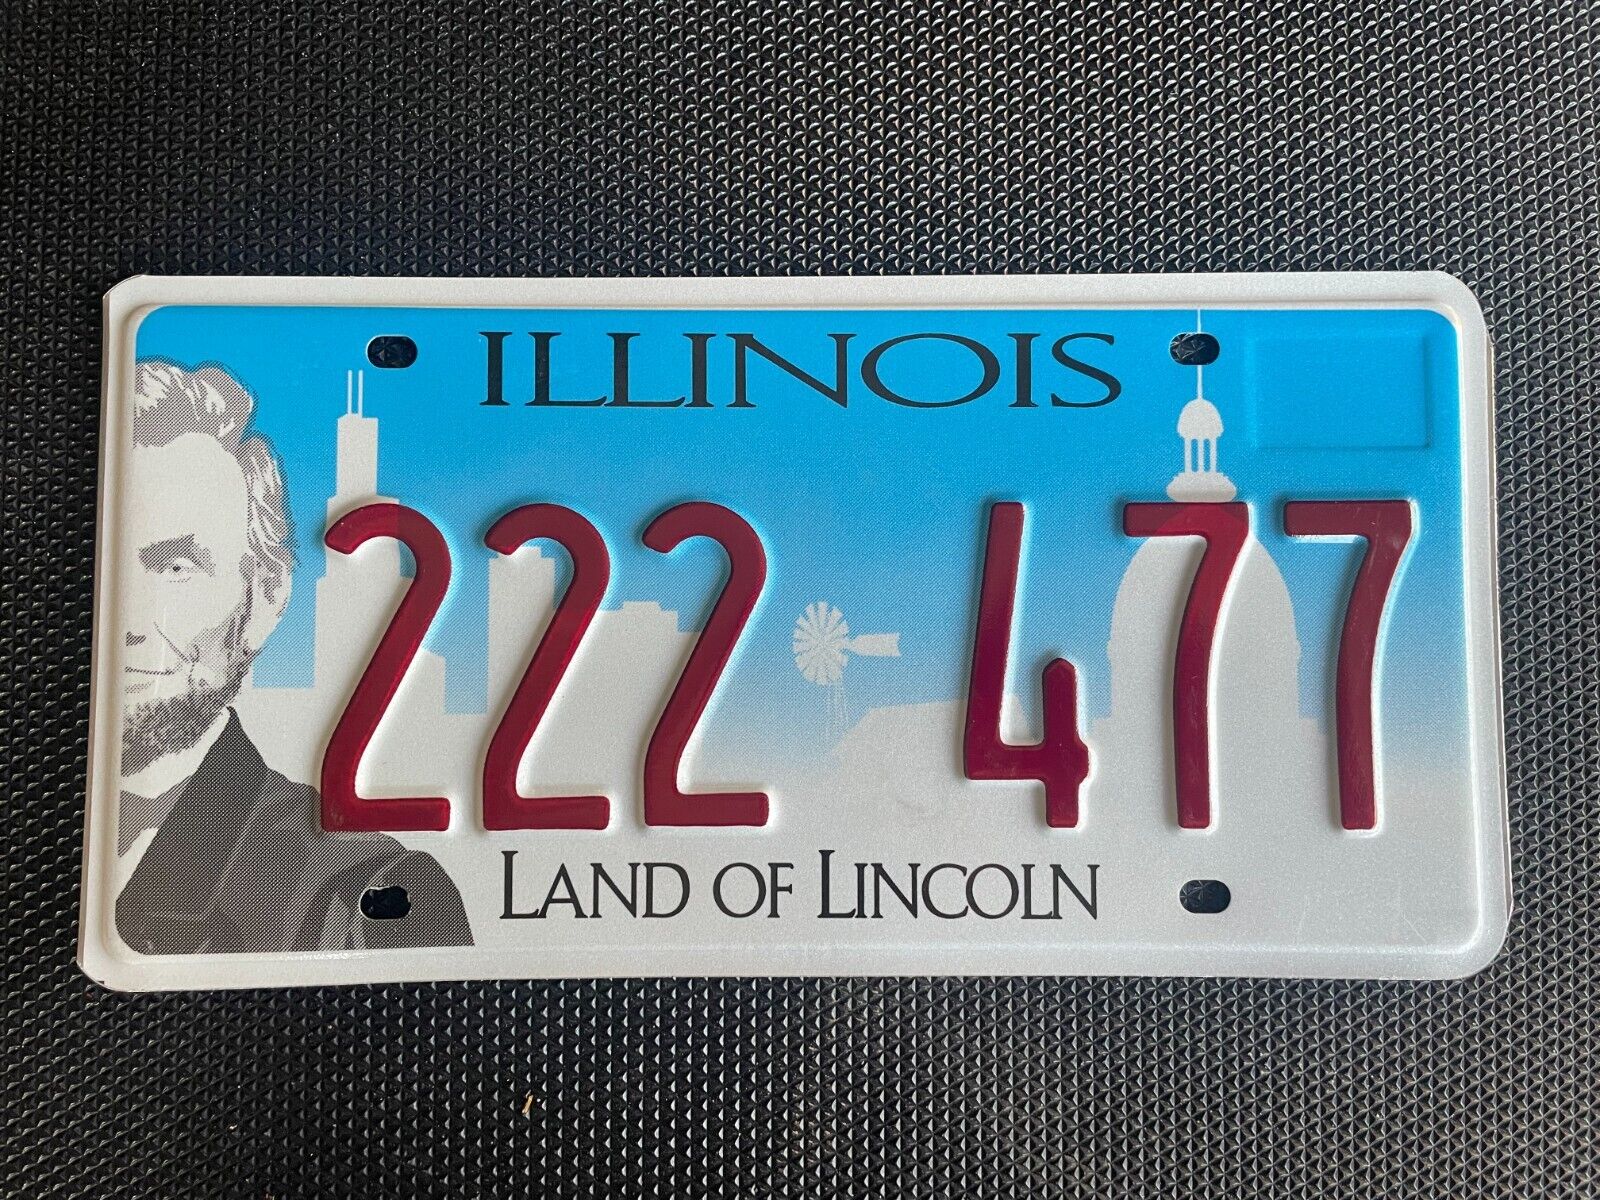 ILLINOIS TRIPLE 222 LICENSE PLATE TWOS TRIPLE NUMBER REPEATING 222 477